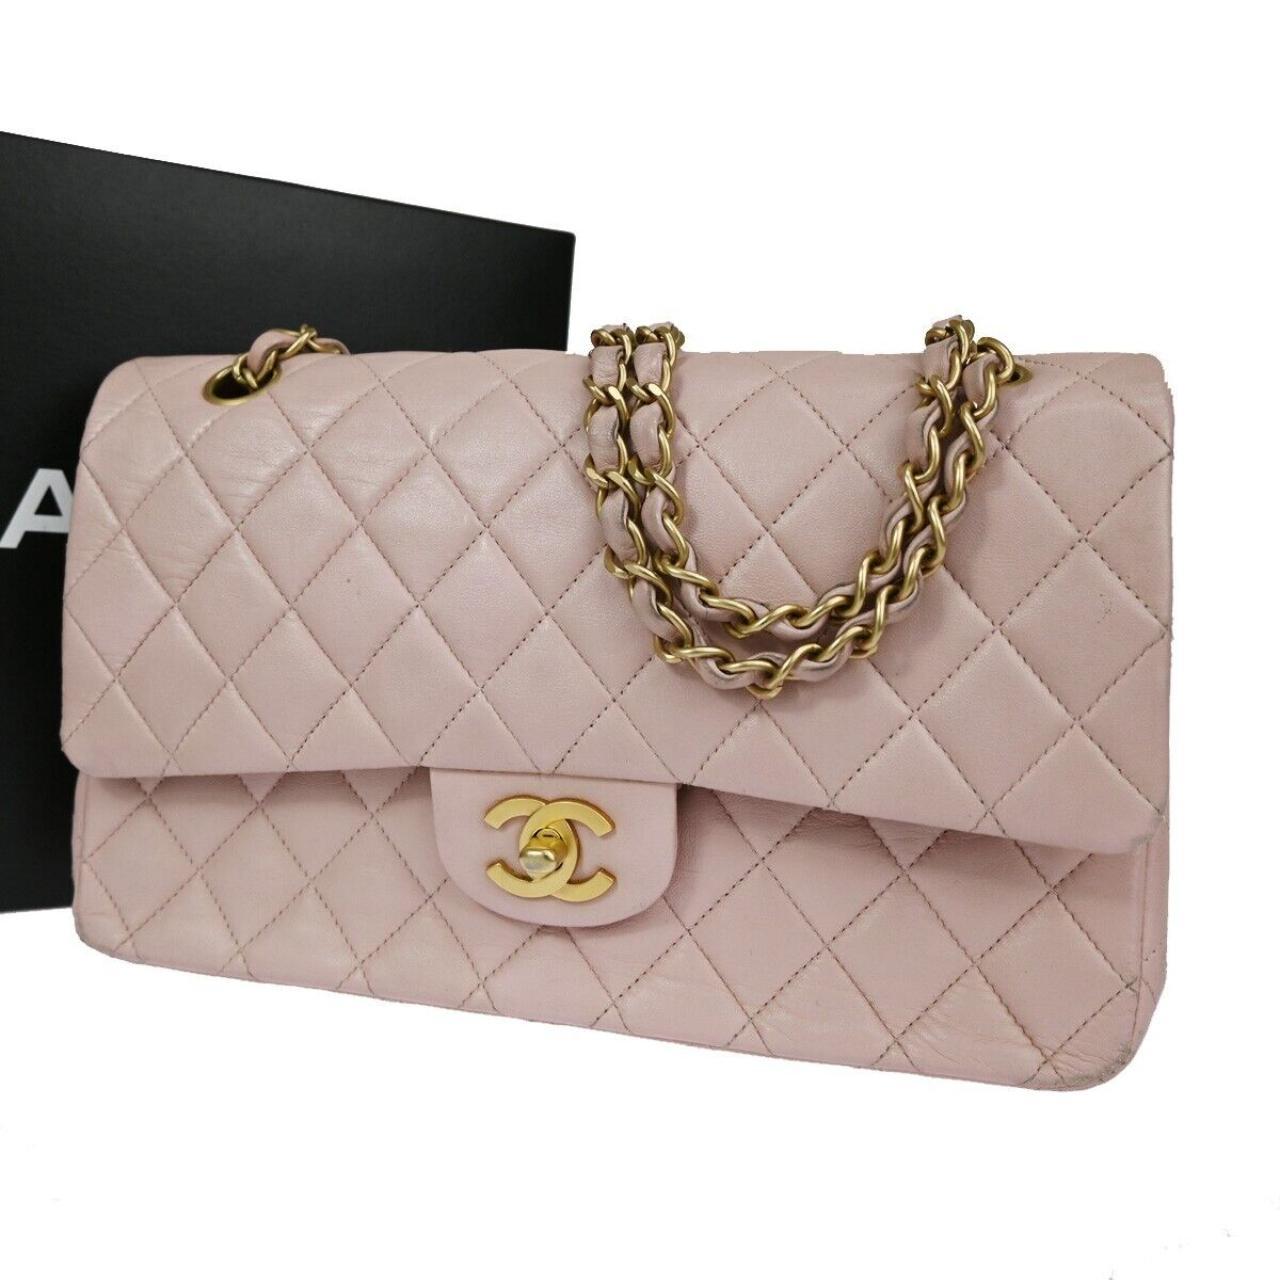 10 Steps You Can Take to Authenticate Any Chanel Bag | Baghunter